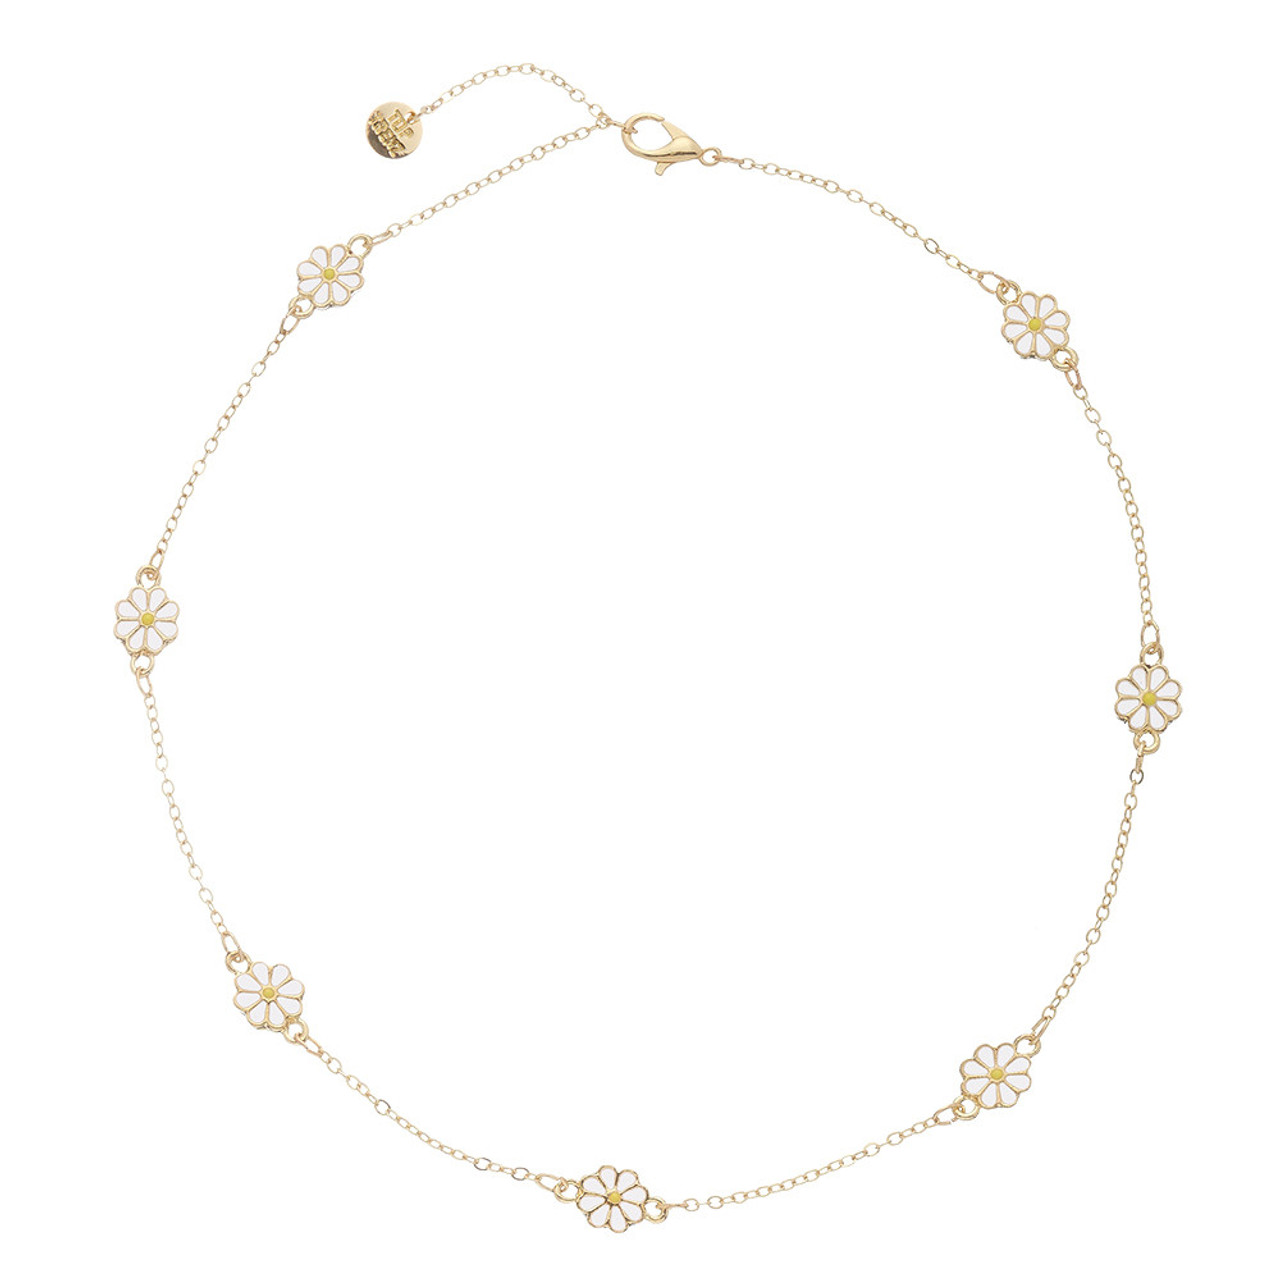 Top Trenz Charm After Charm Choker Necklaces Collection